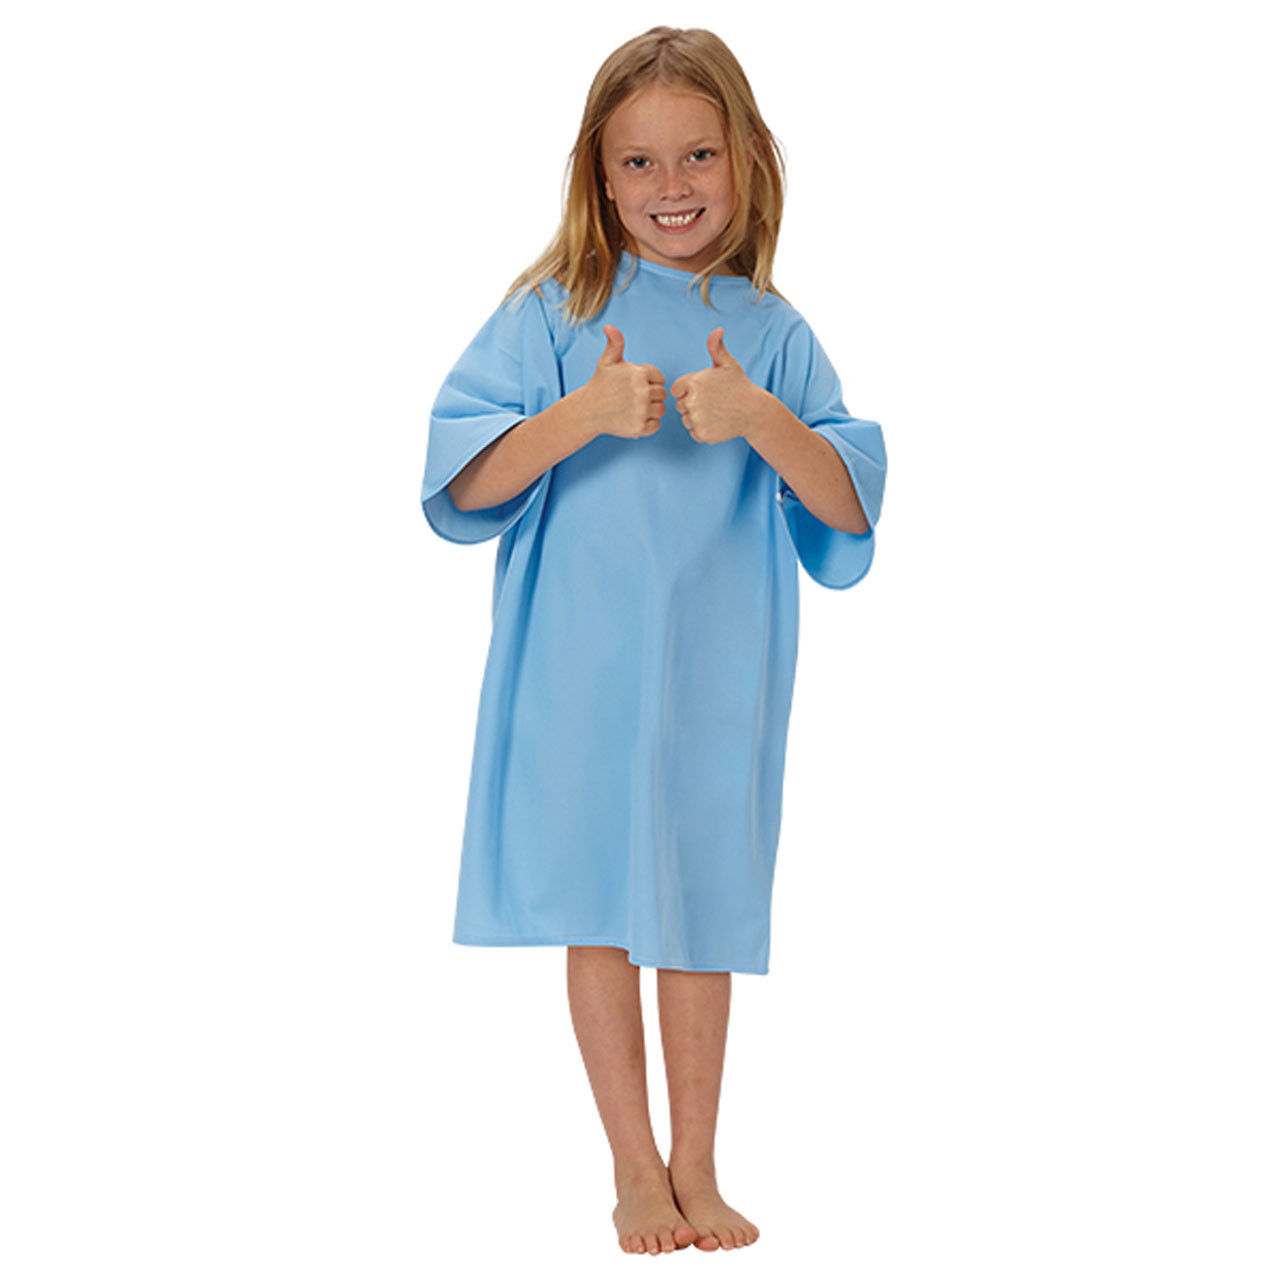 Are these child hospital gowns sold individually or in bulk?